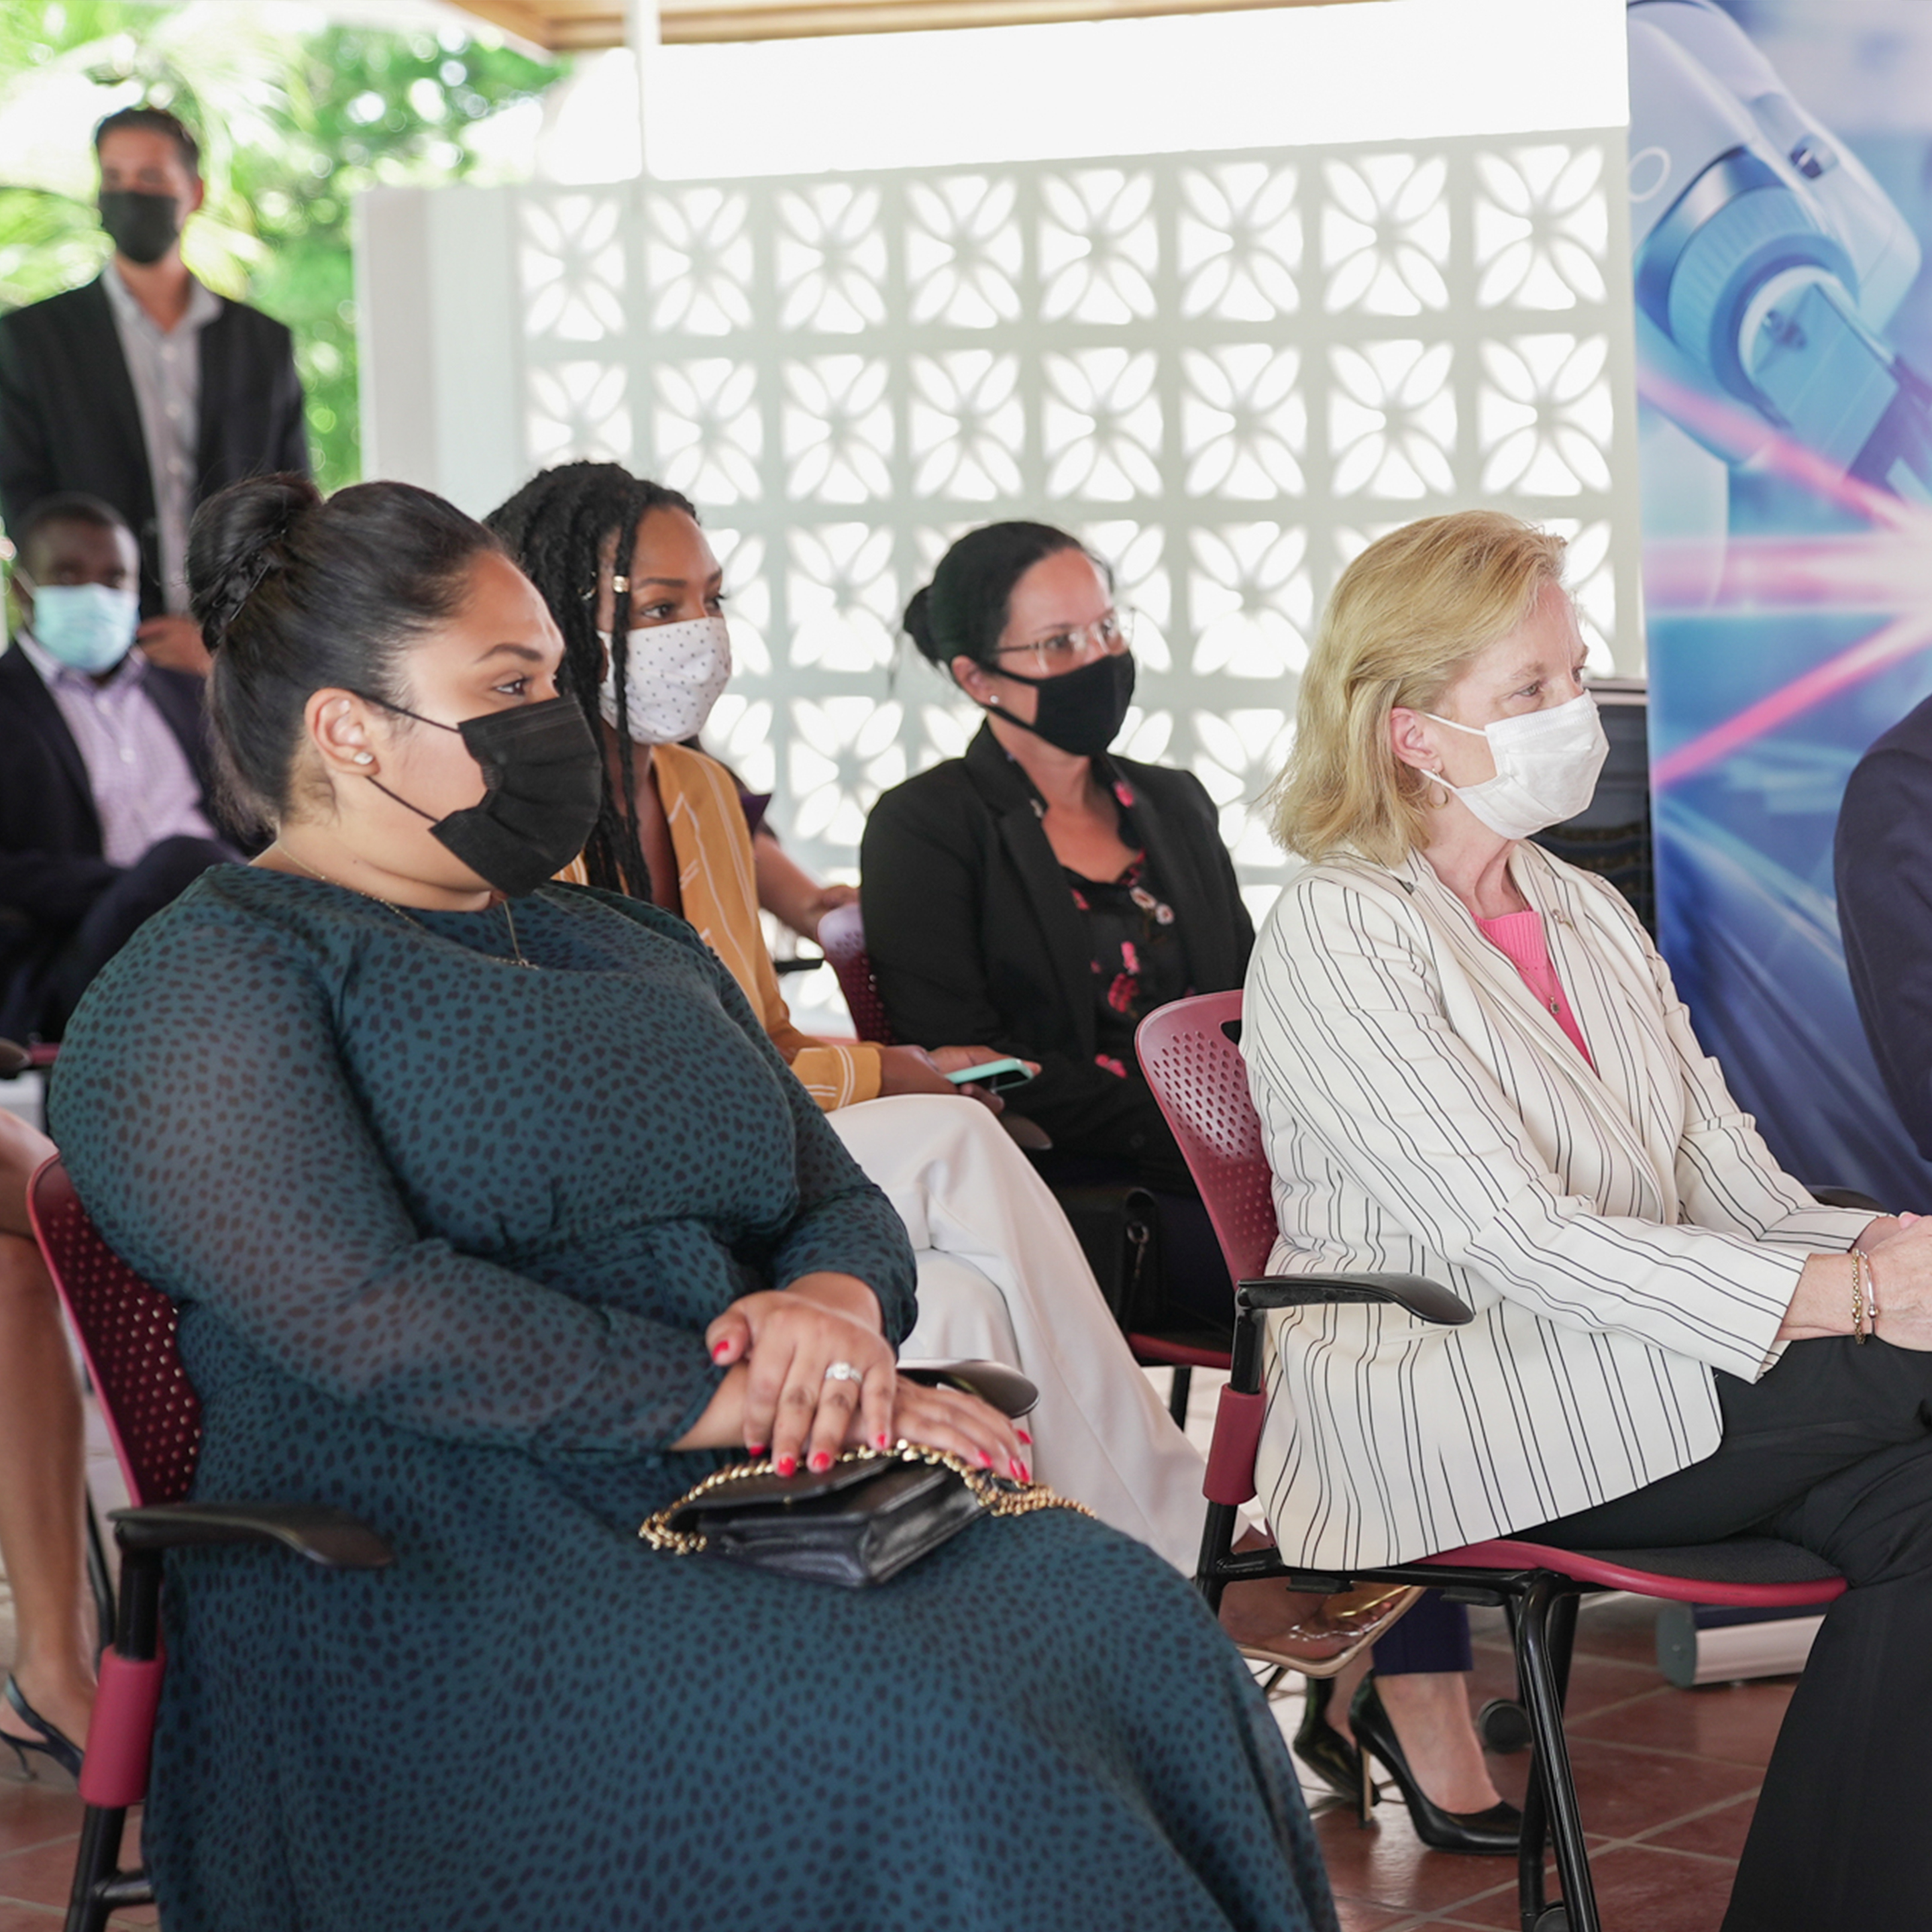 Image Guyanese First Lady Aril Ali (l) sits beside U.S. Ambassador to Guyana Sarah-Ann Lynch and Esso Exploration and Production Guyana Limited Lead Country Manager Alistair Routledge at a 2021 event launching the HerVenture business app for women, which was developed by the Cherie Blair Foundation for Women in partnership with the ExxonMobil Foundation.